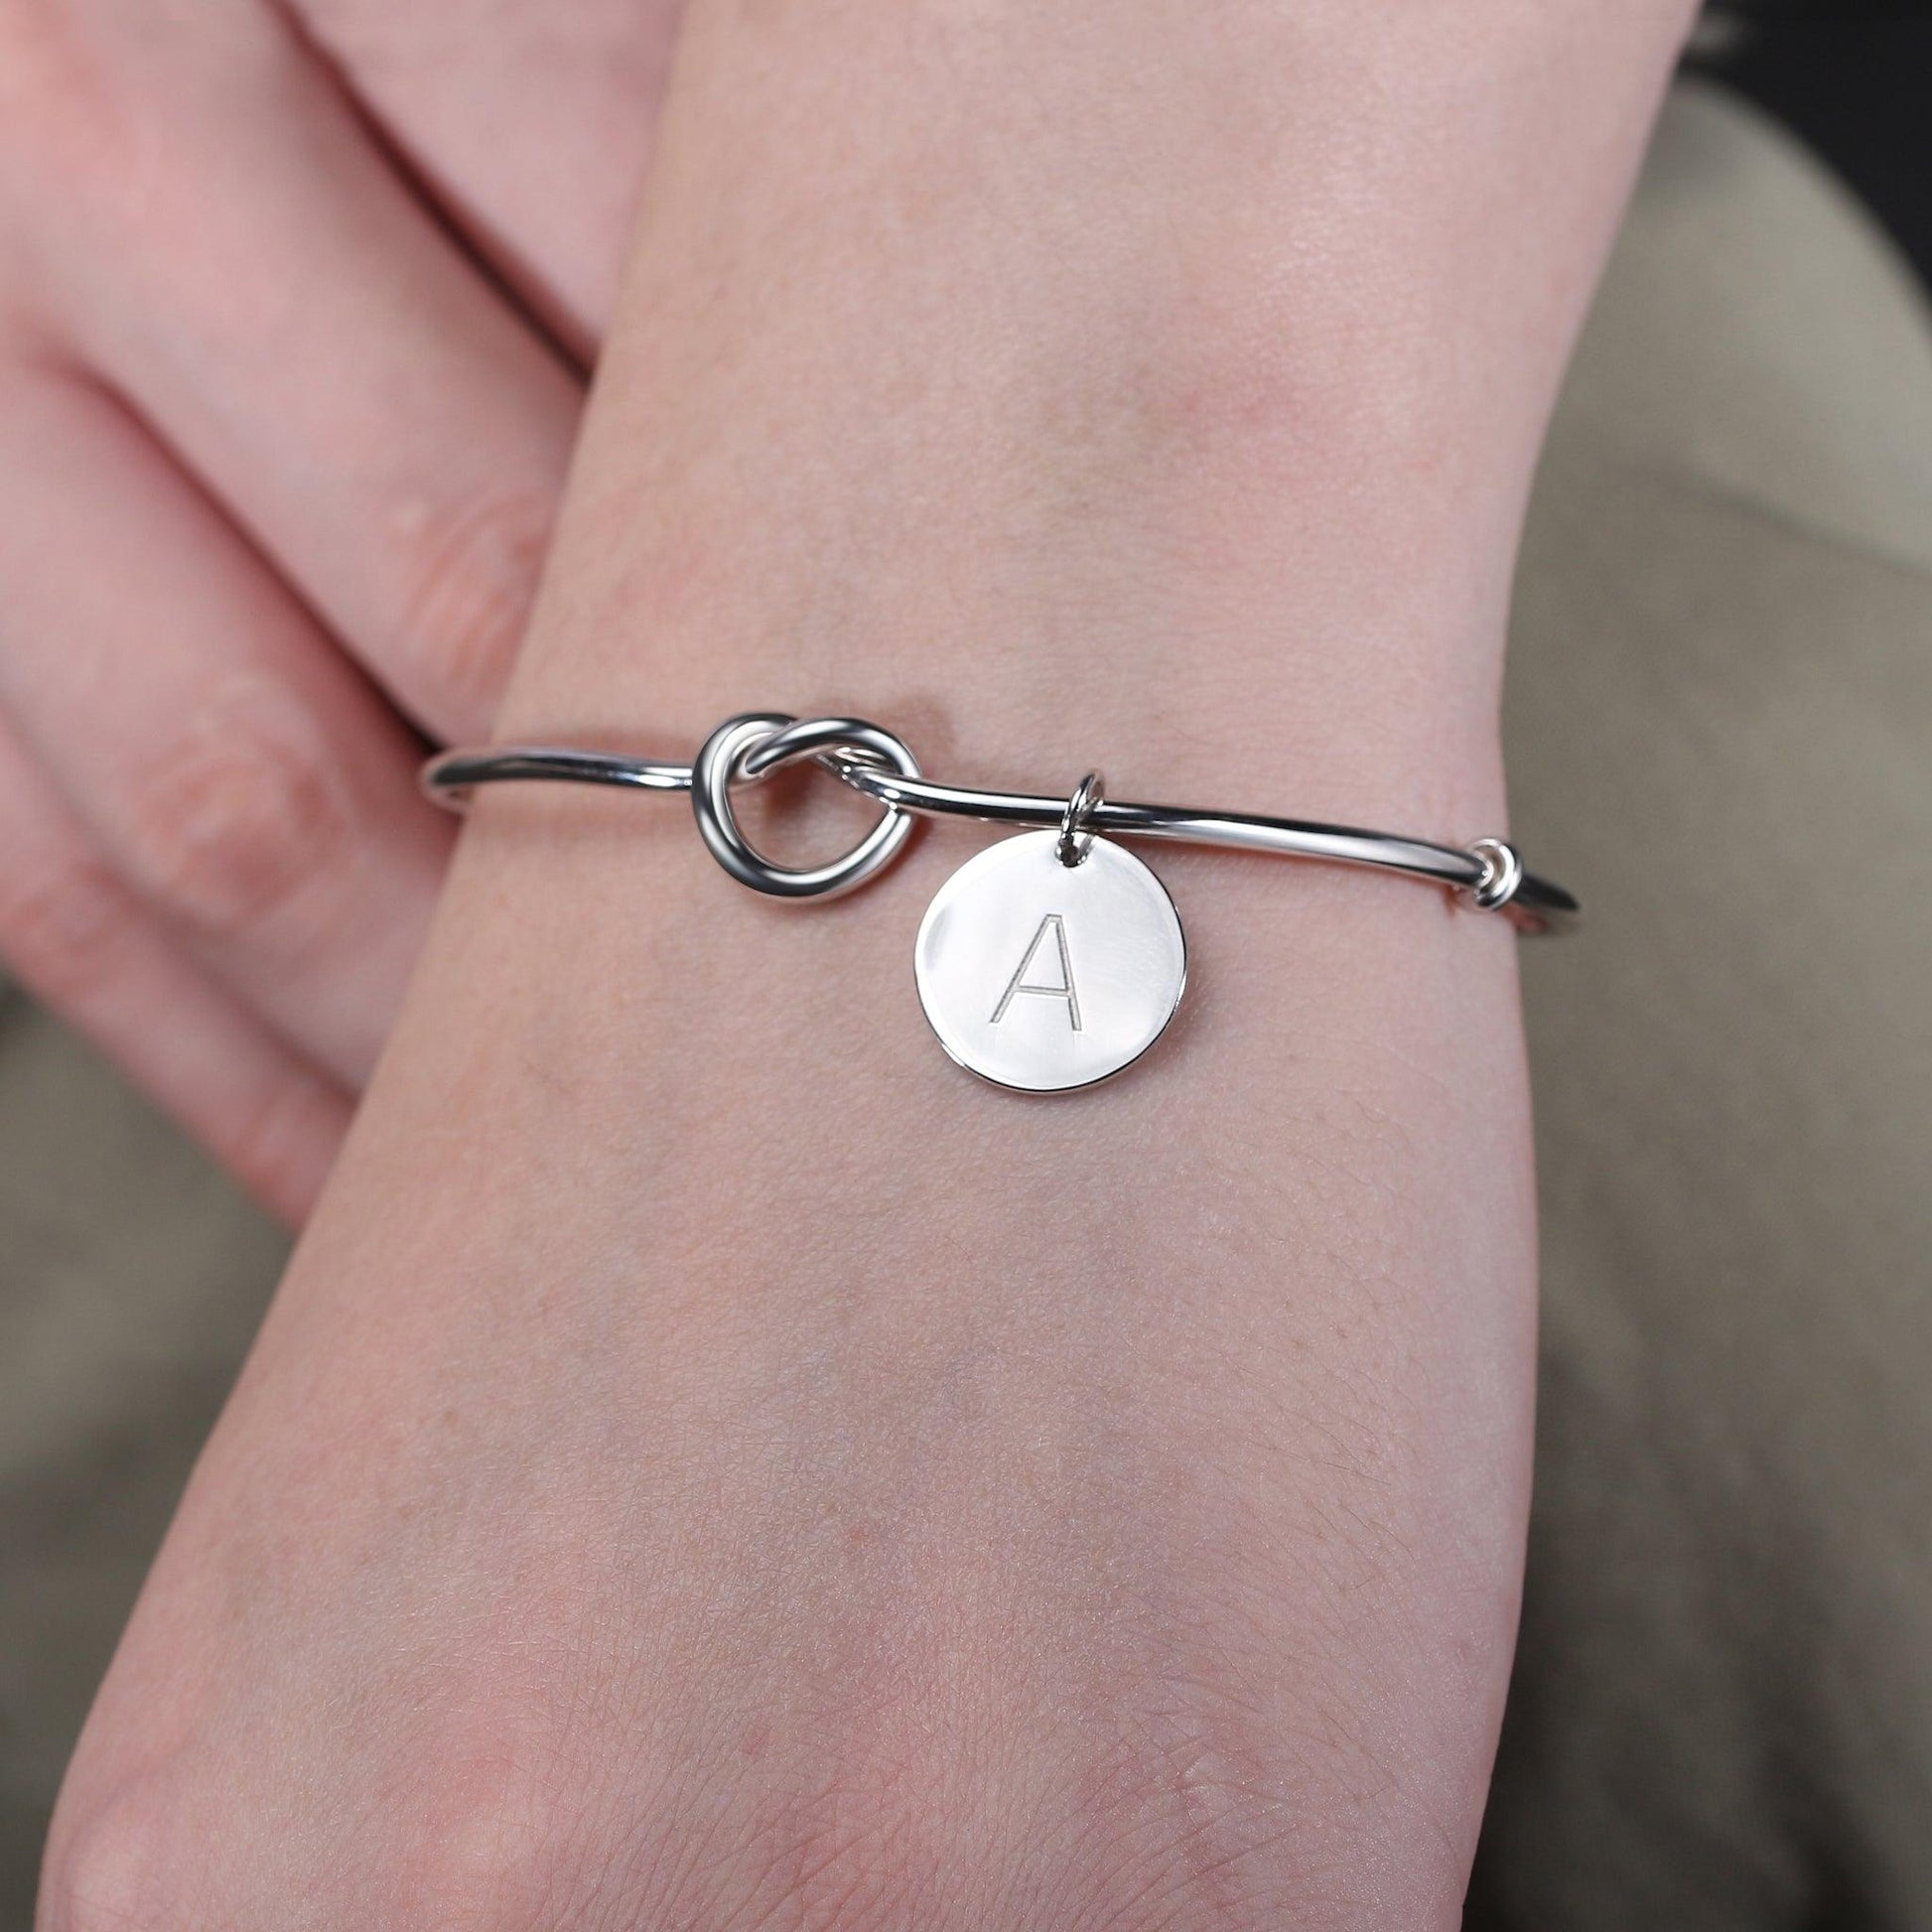 Knot Initial Bracelet in sterling silver includes an initial letter charm for added jewelry personalization.